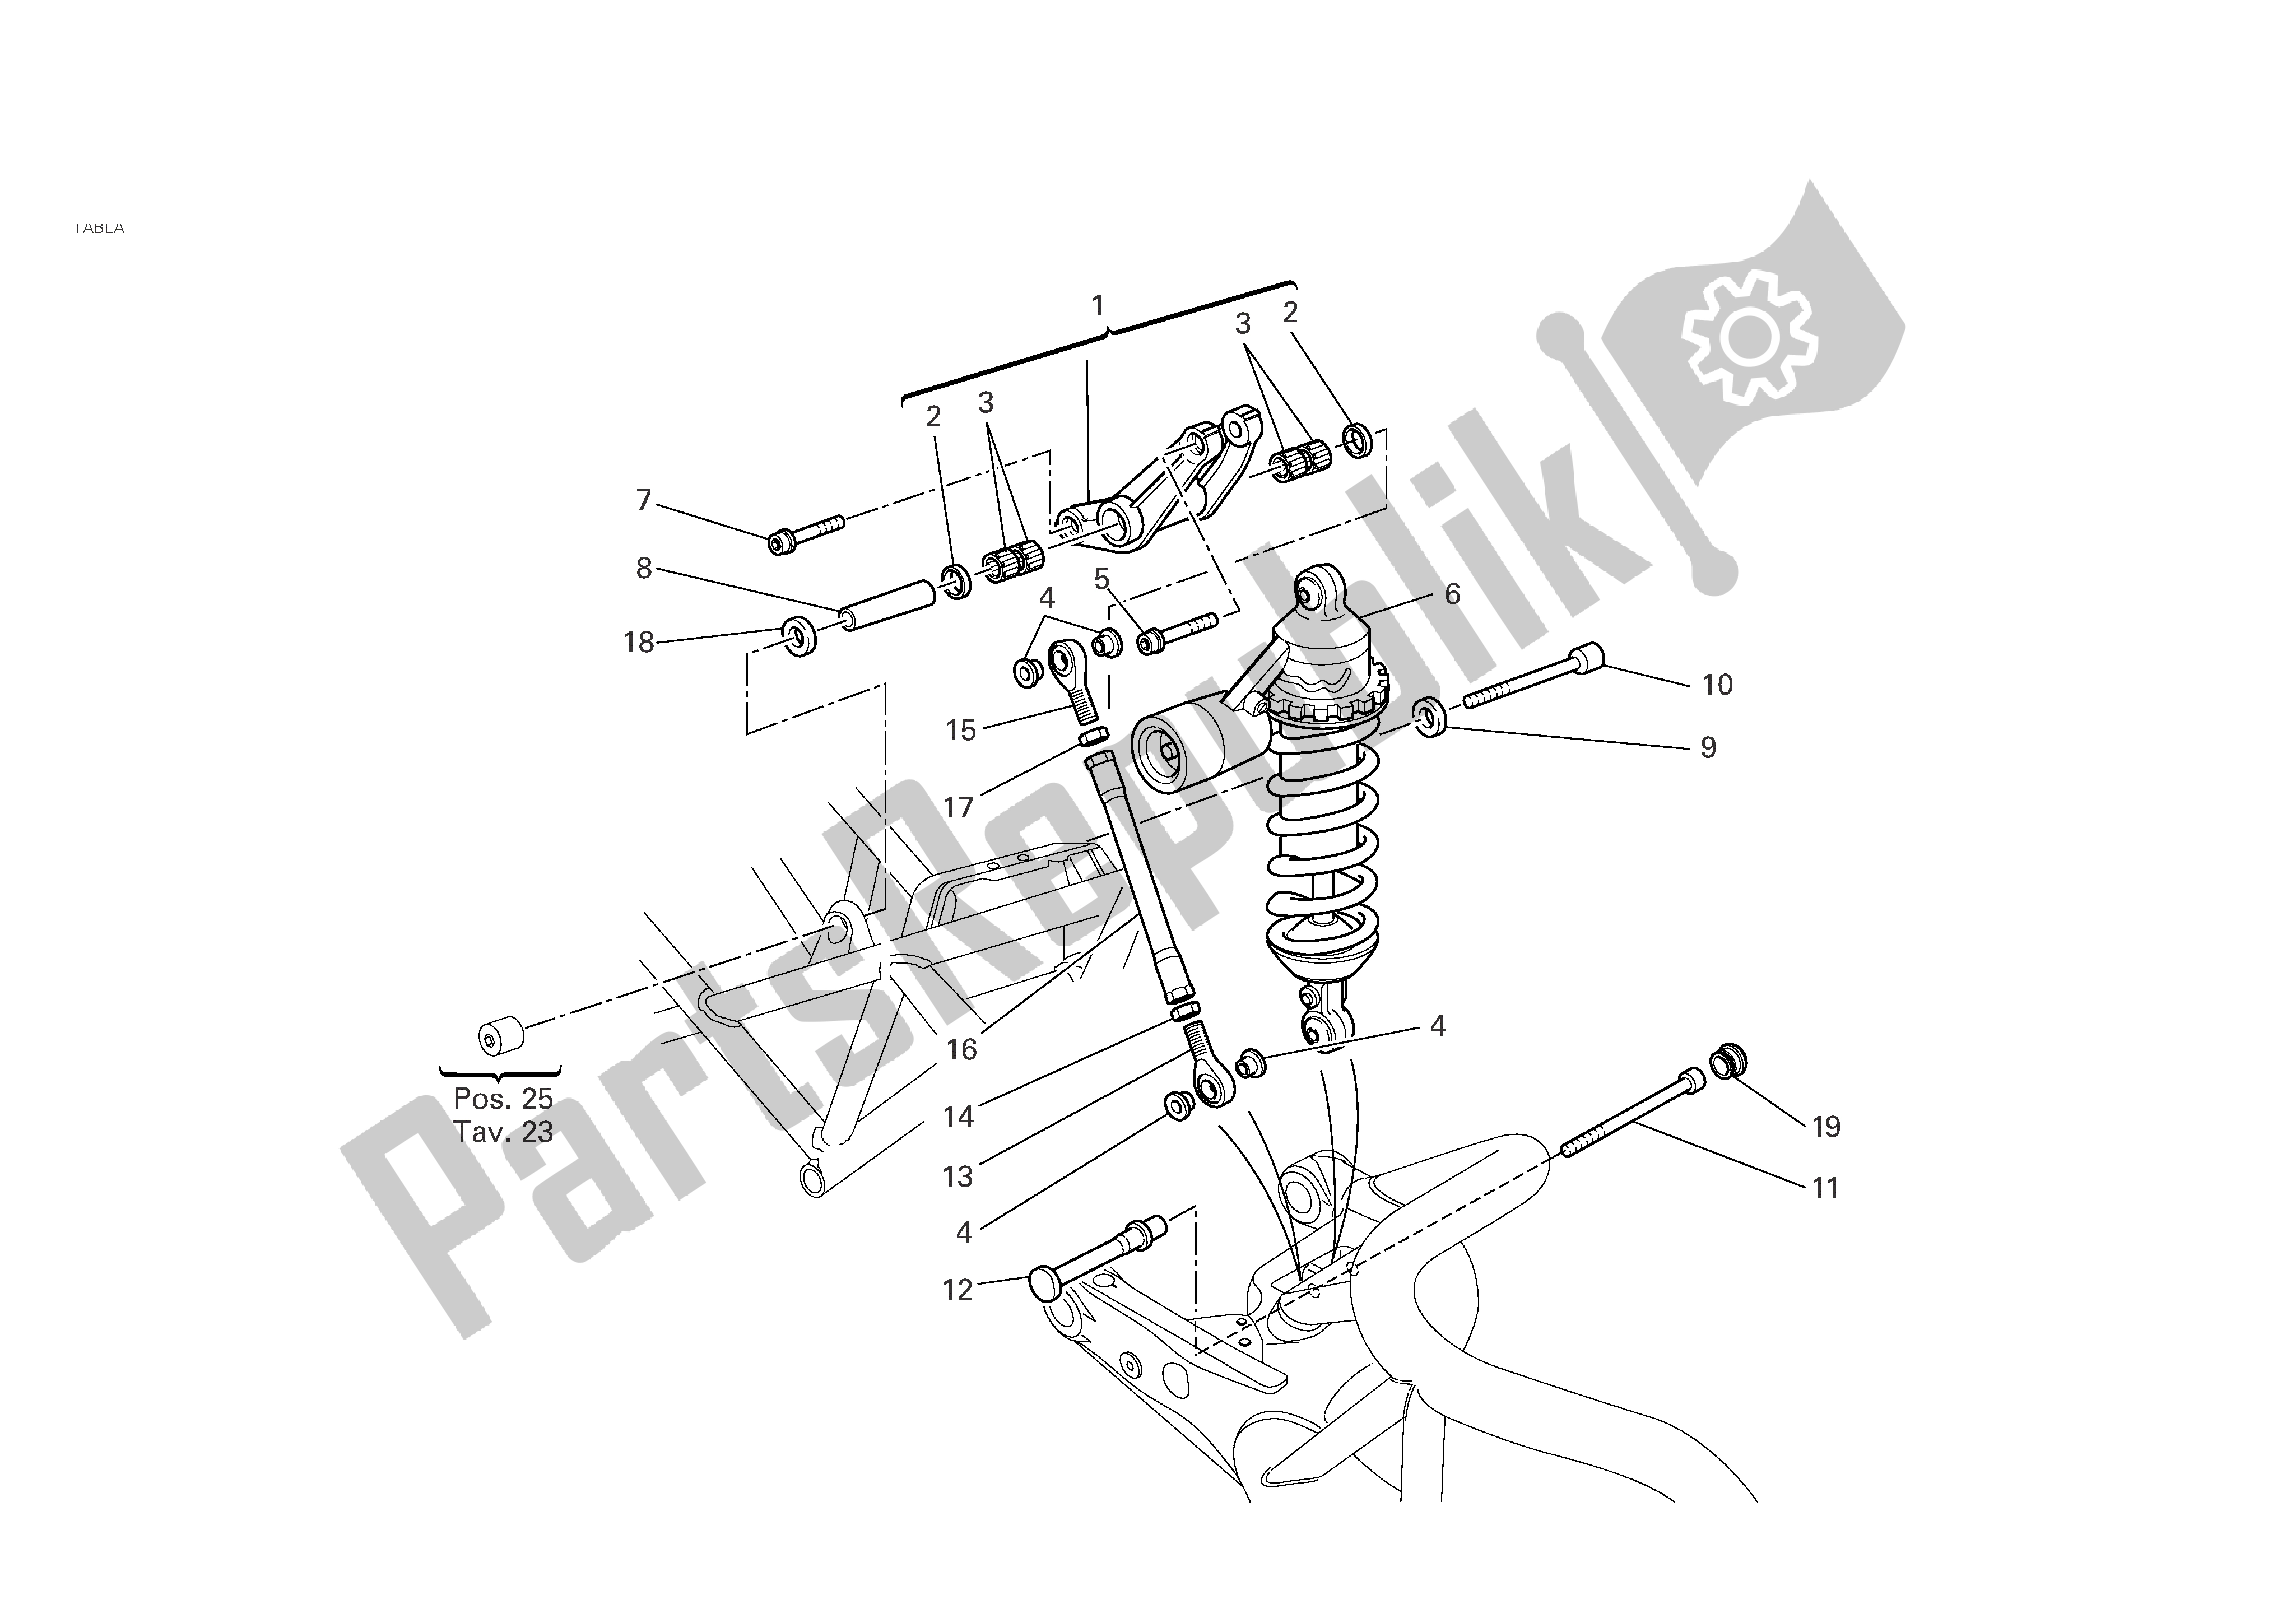 All parts for the Rear Suspension of the Ducati Monster S4R 996 2004